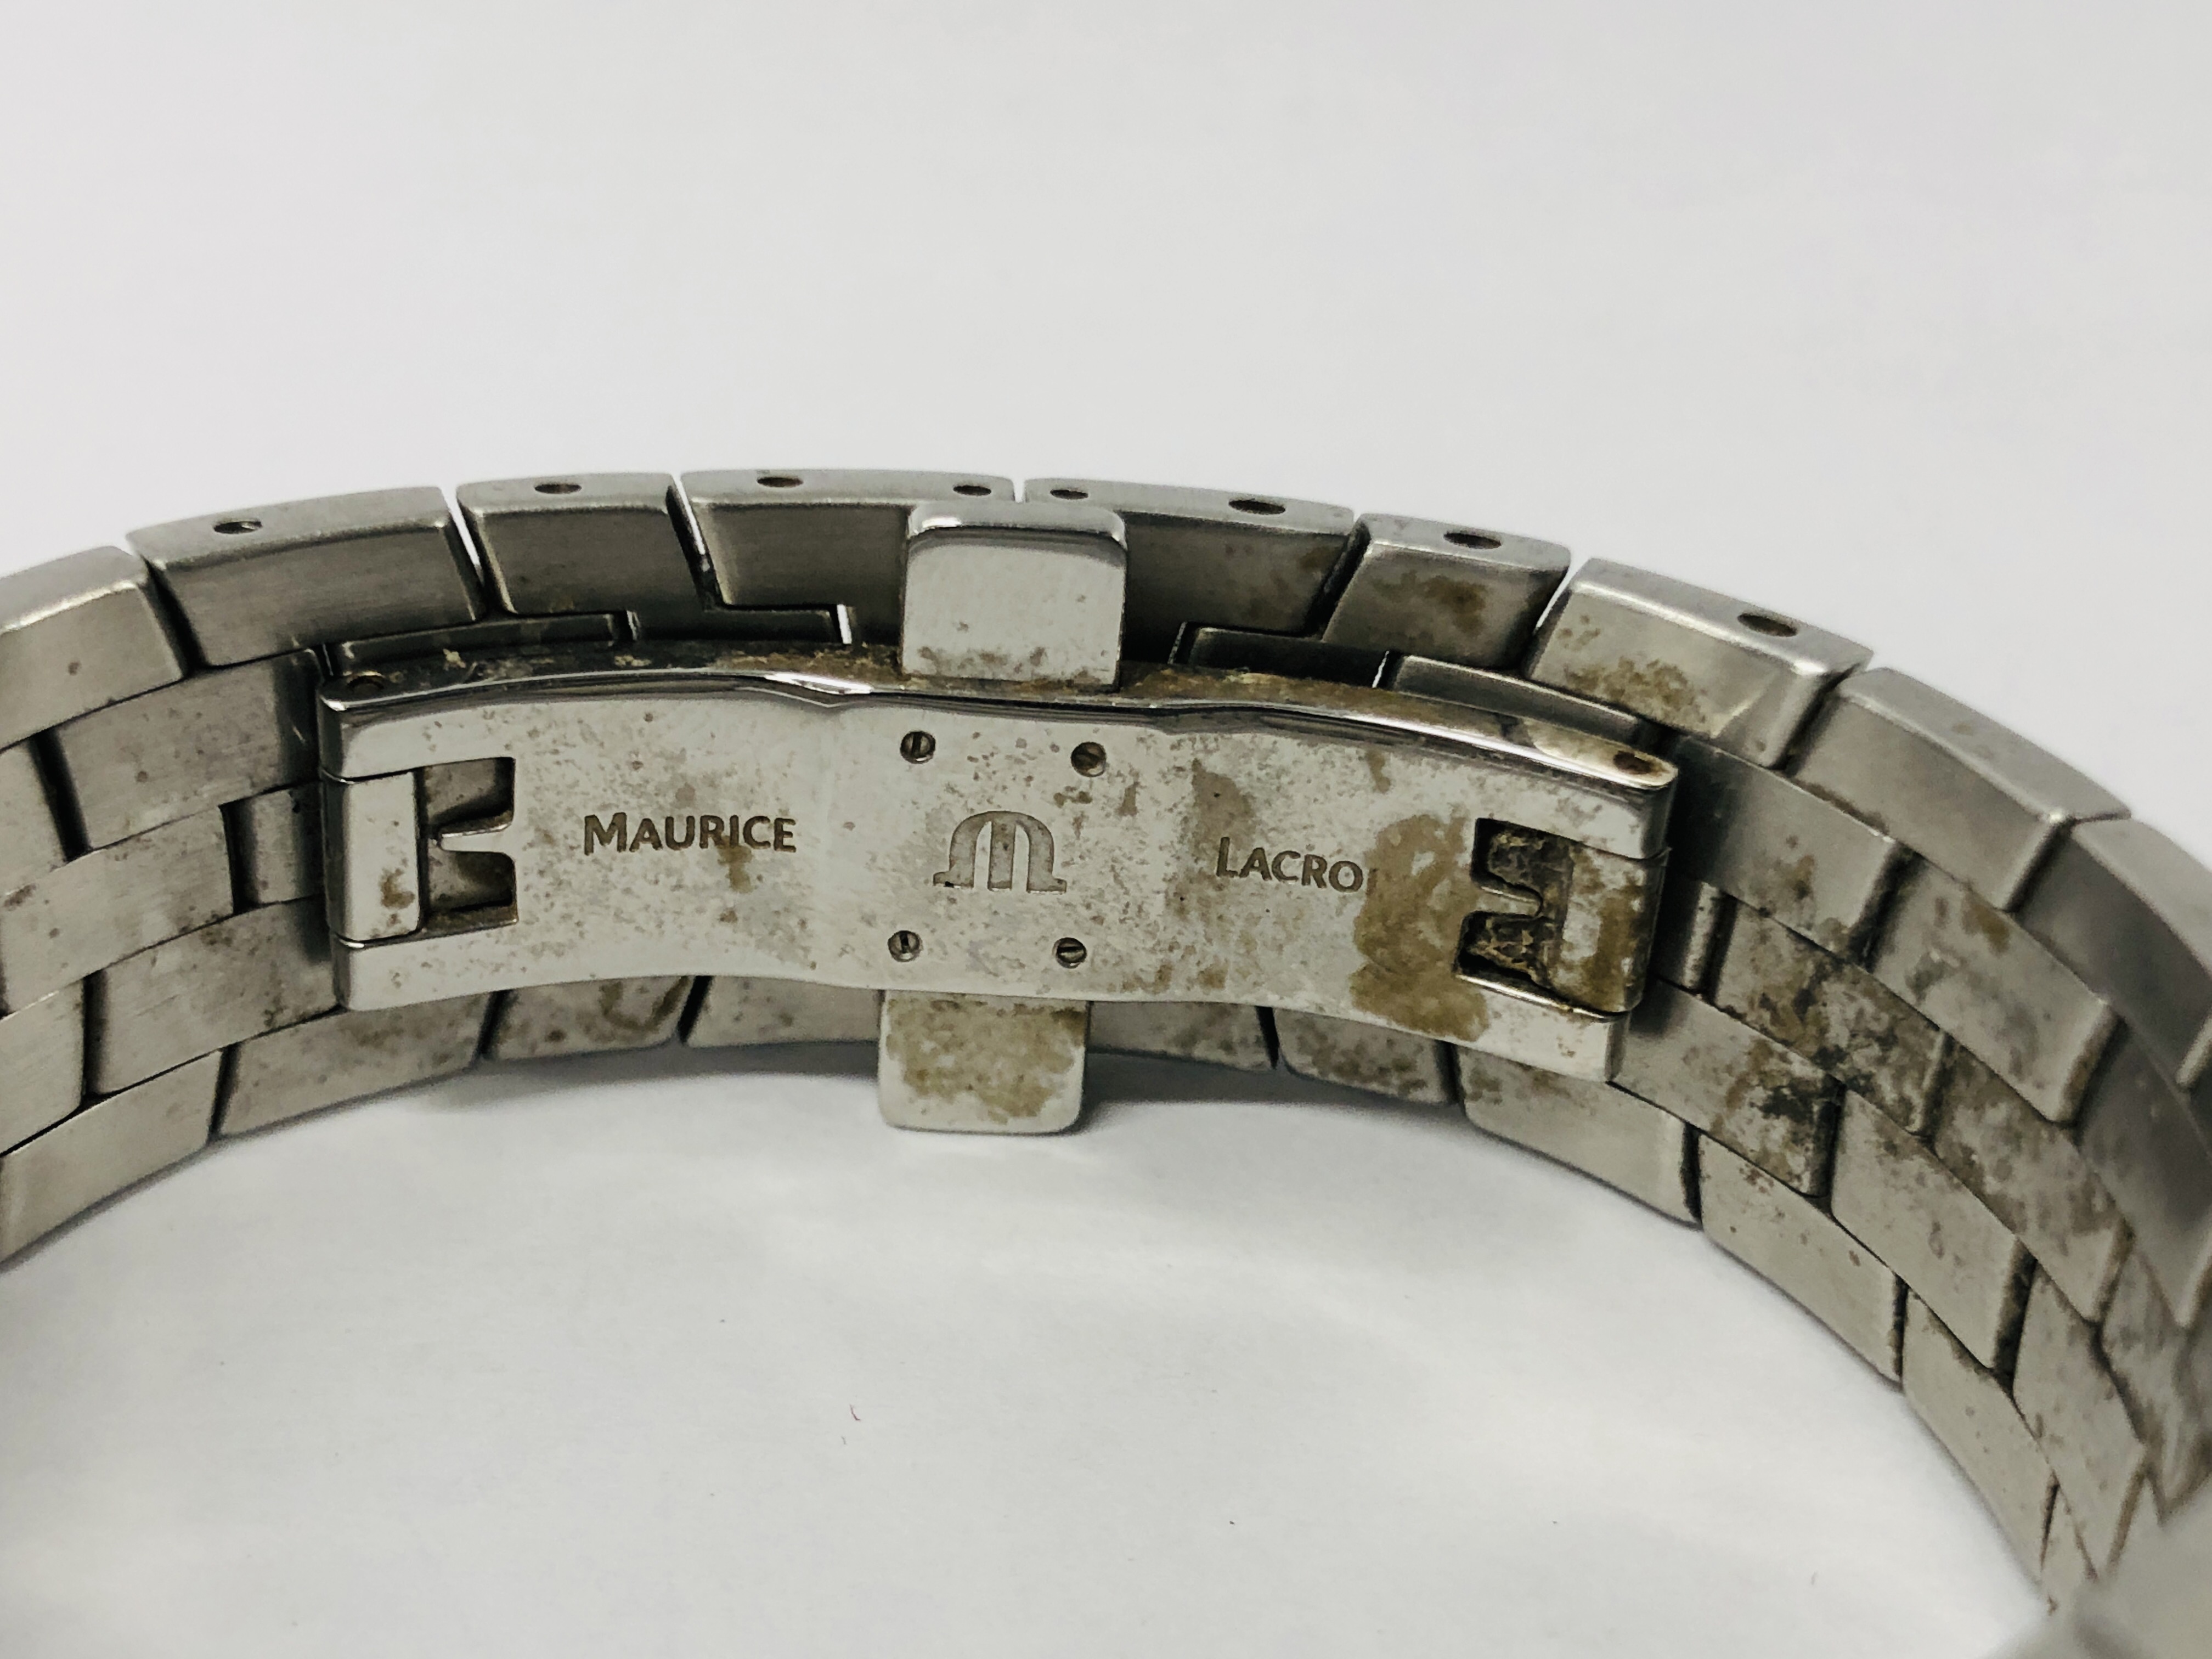 LADIES MAURICE LACROIX BRACELET WATCH THE CASE MARKED STAINLESS STEEL AND 18K 750 - Image 6 of 7